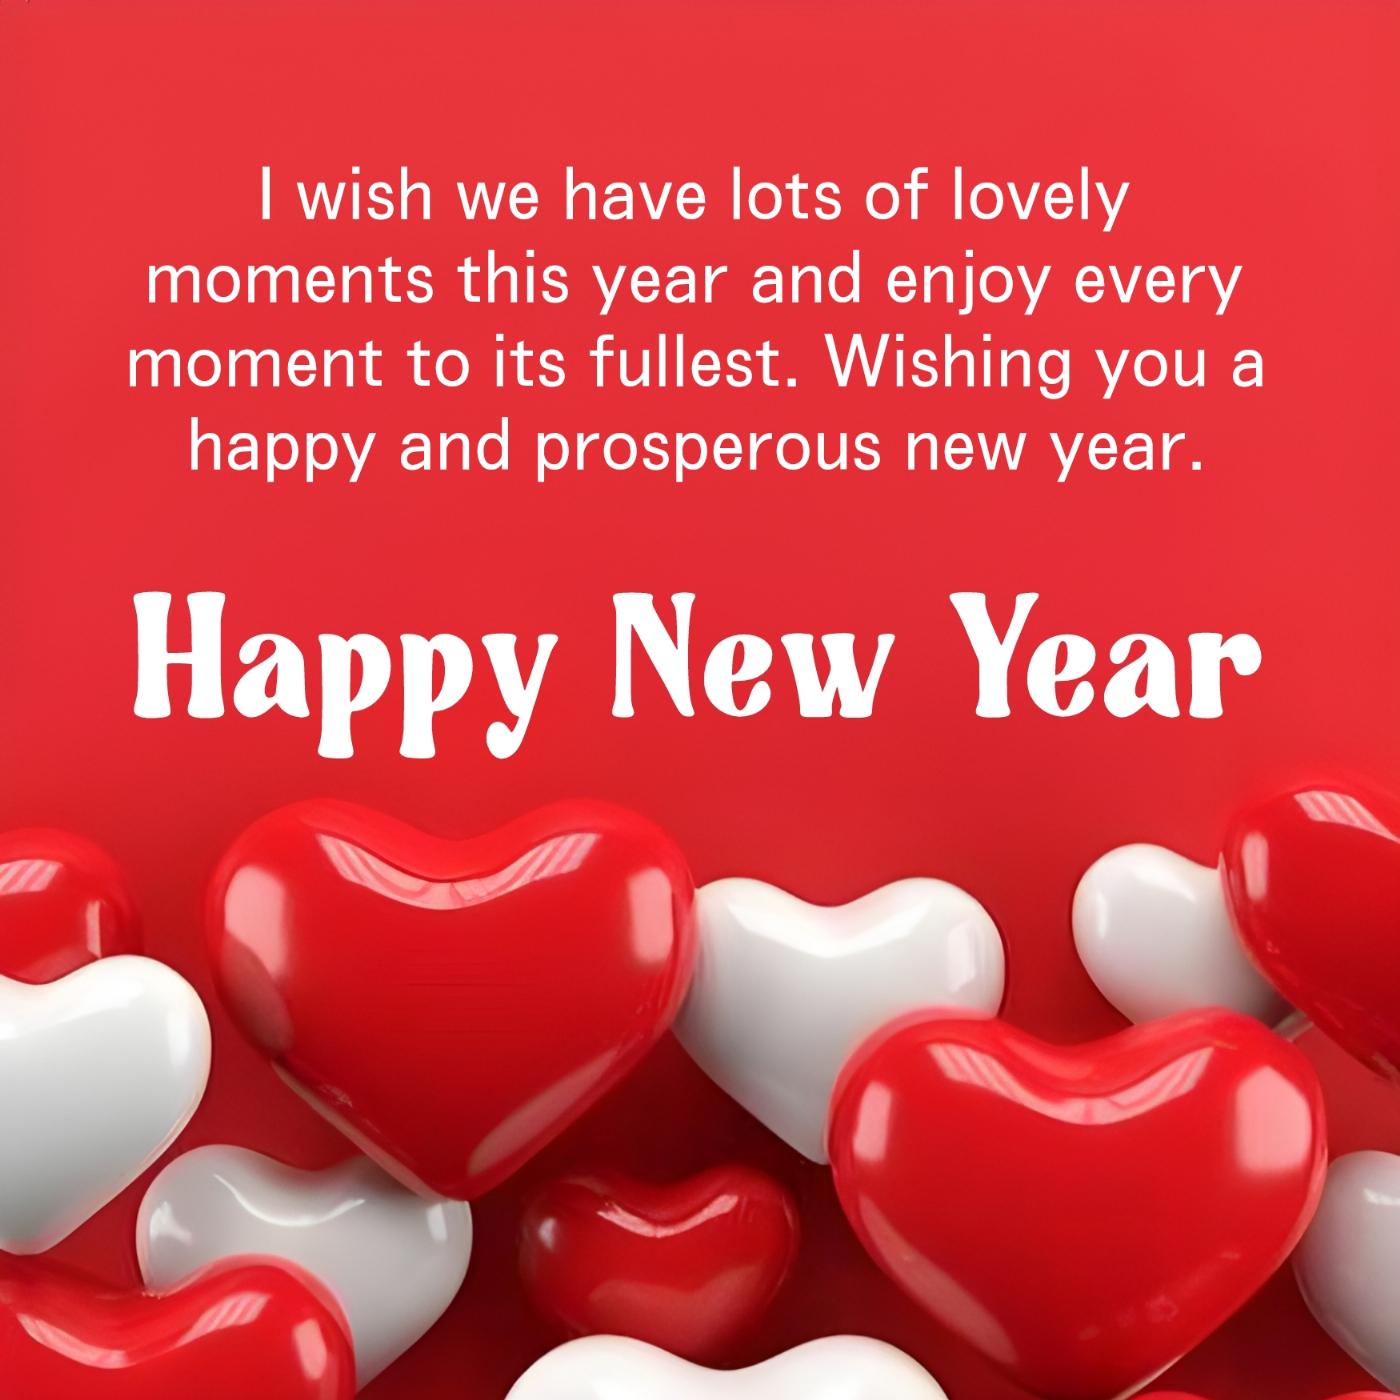 I wish we have lots of lovely moments this year